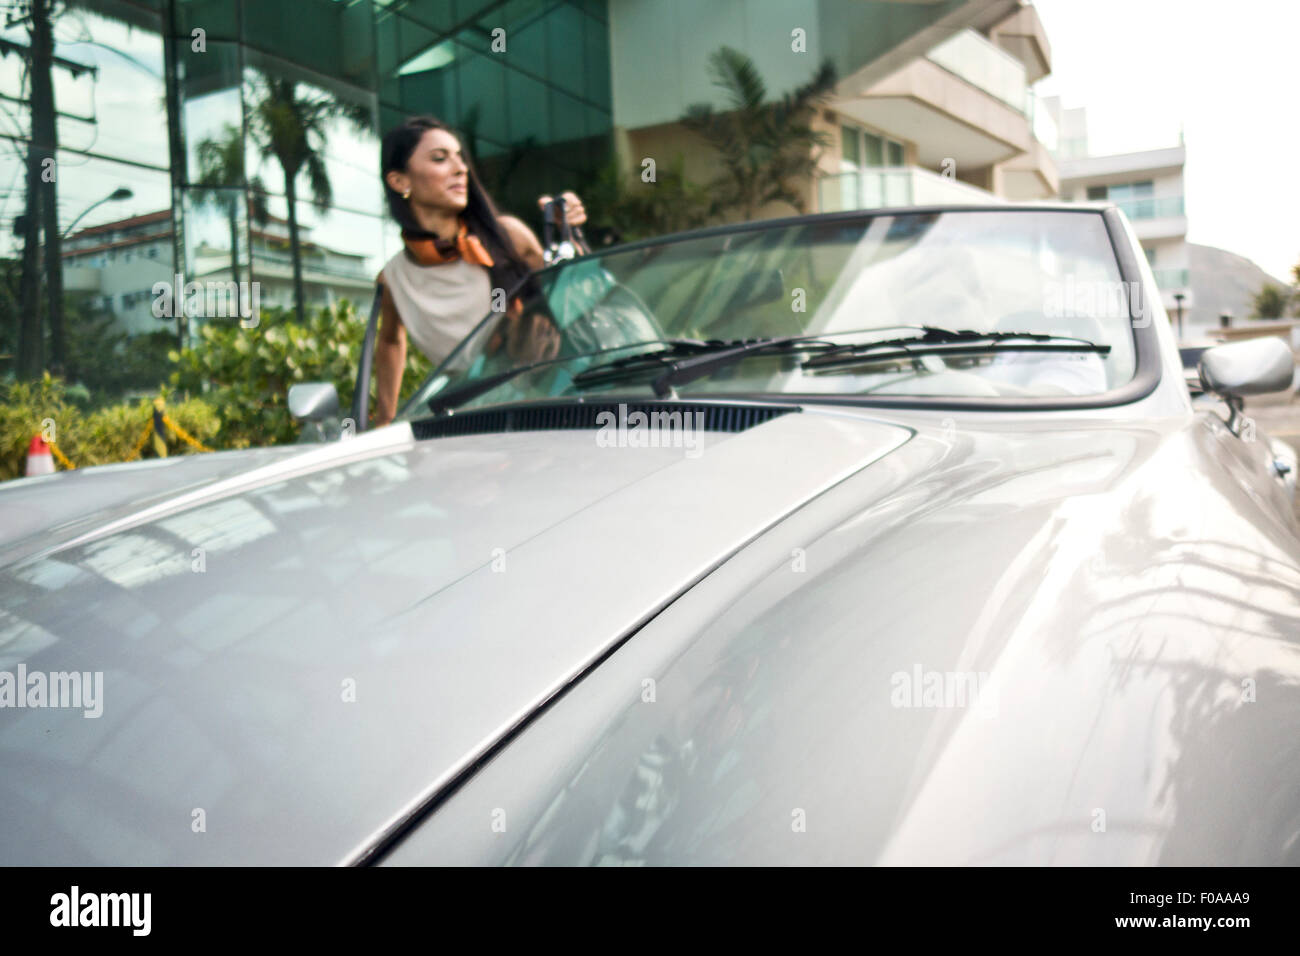 Mid adult woman getting into convertible car Stock Photo